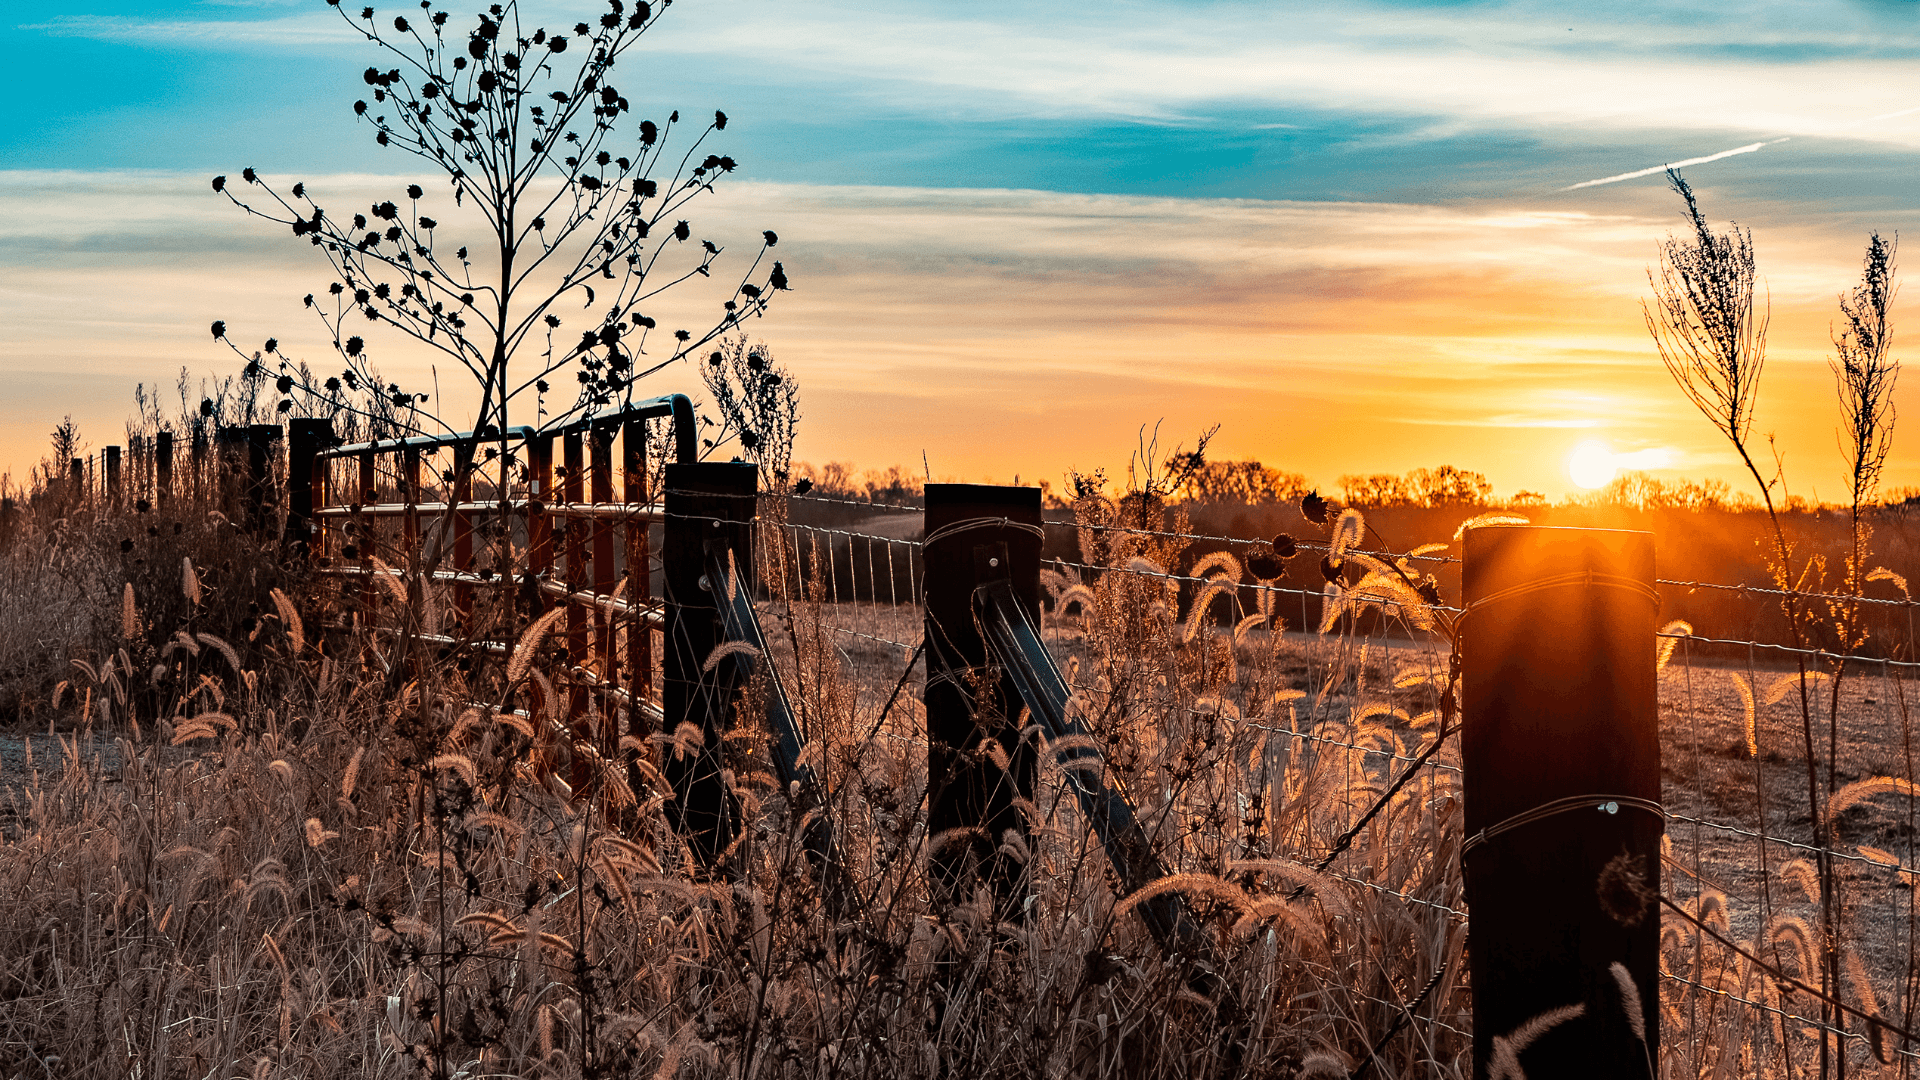 Sunset over a fence in a field, showcasing vibrant colors.